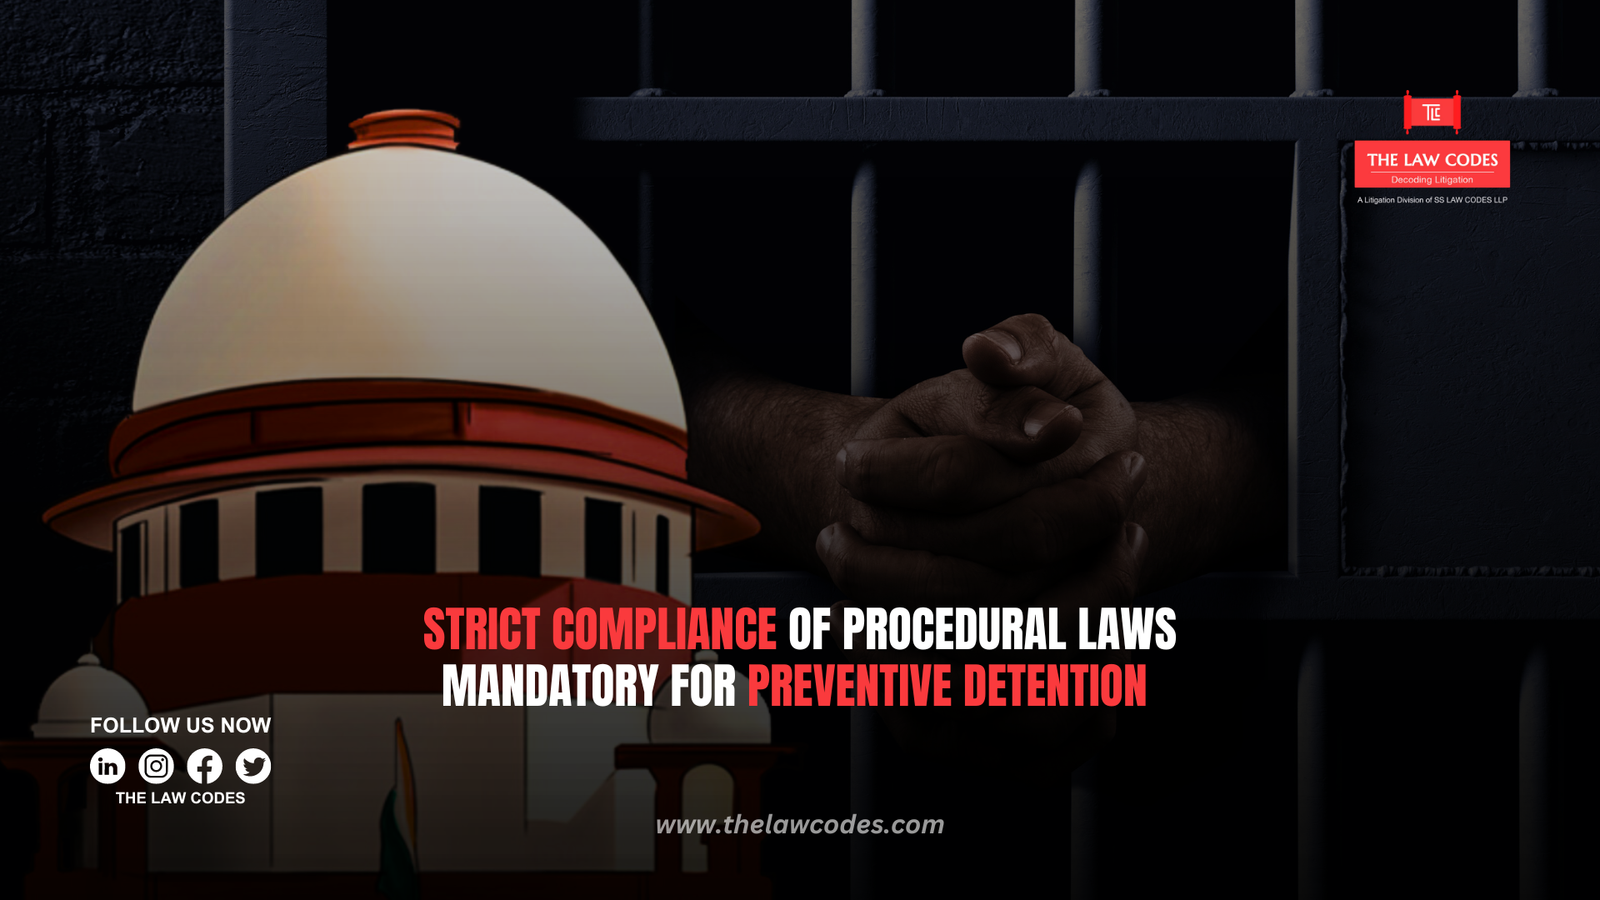 STRICT COMPLIANCE OF PROCEDURAL LAWS MANDATORY FOR PREVENTIVE DETENTION